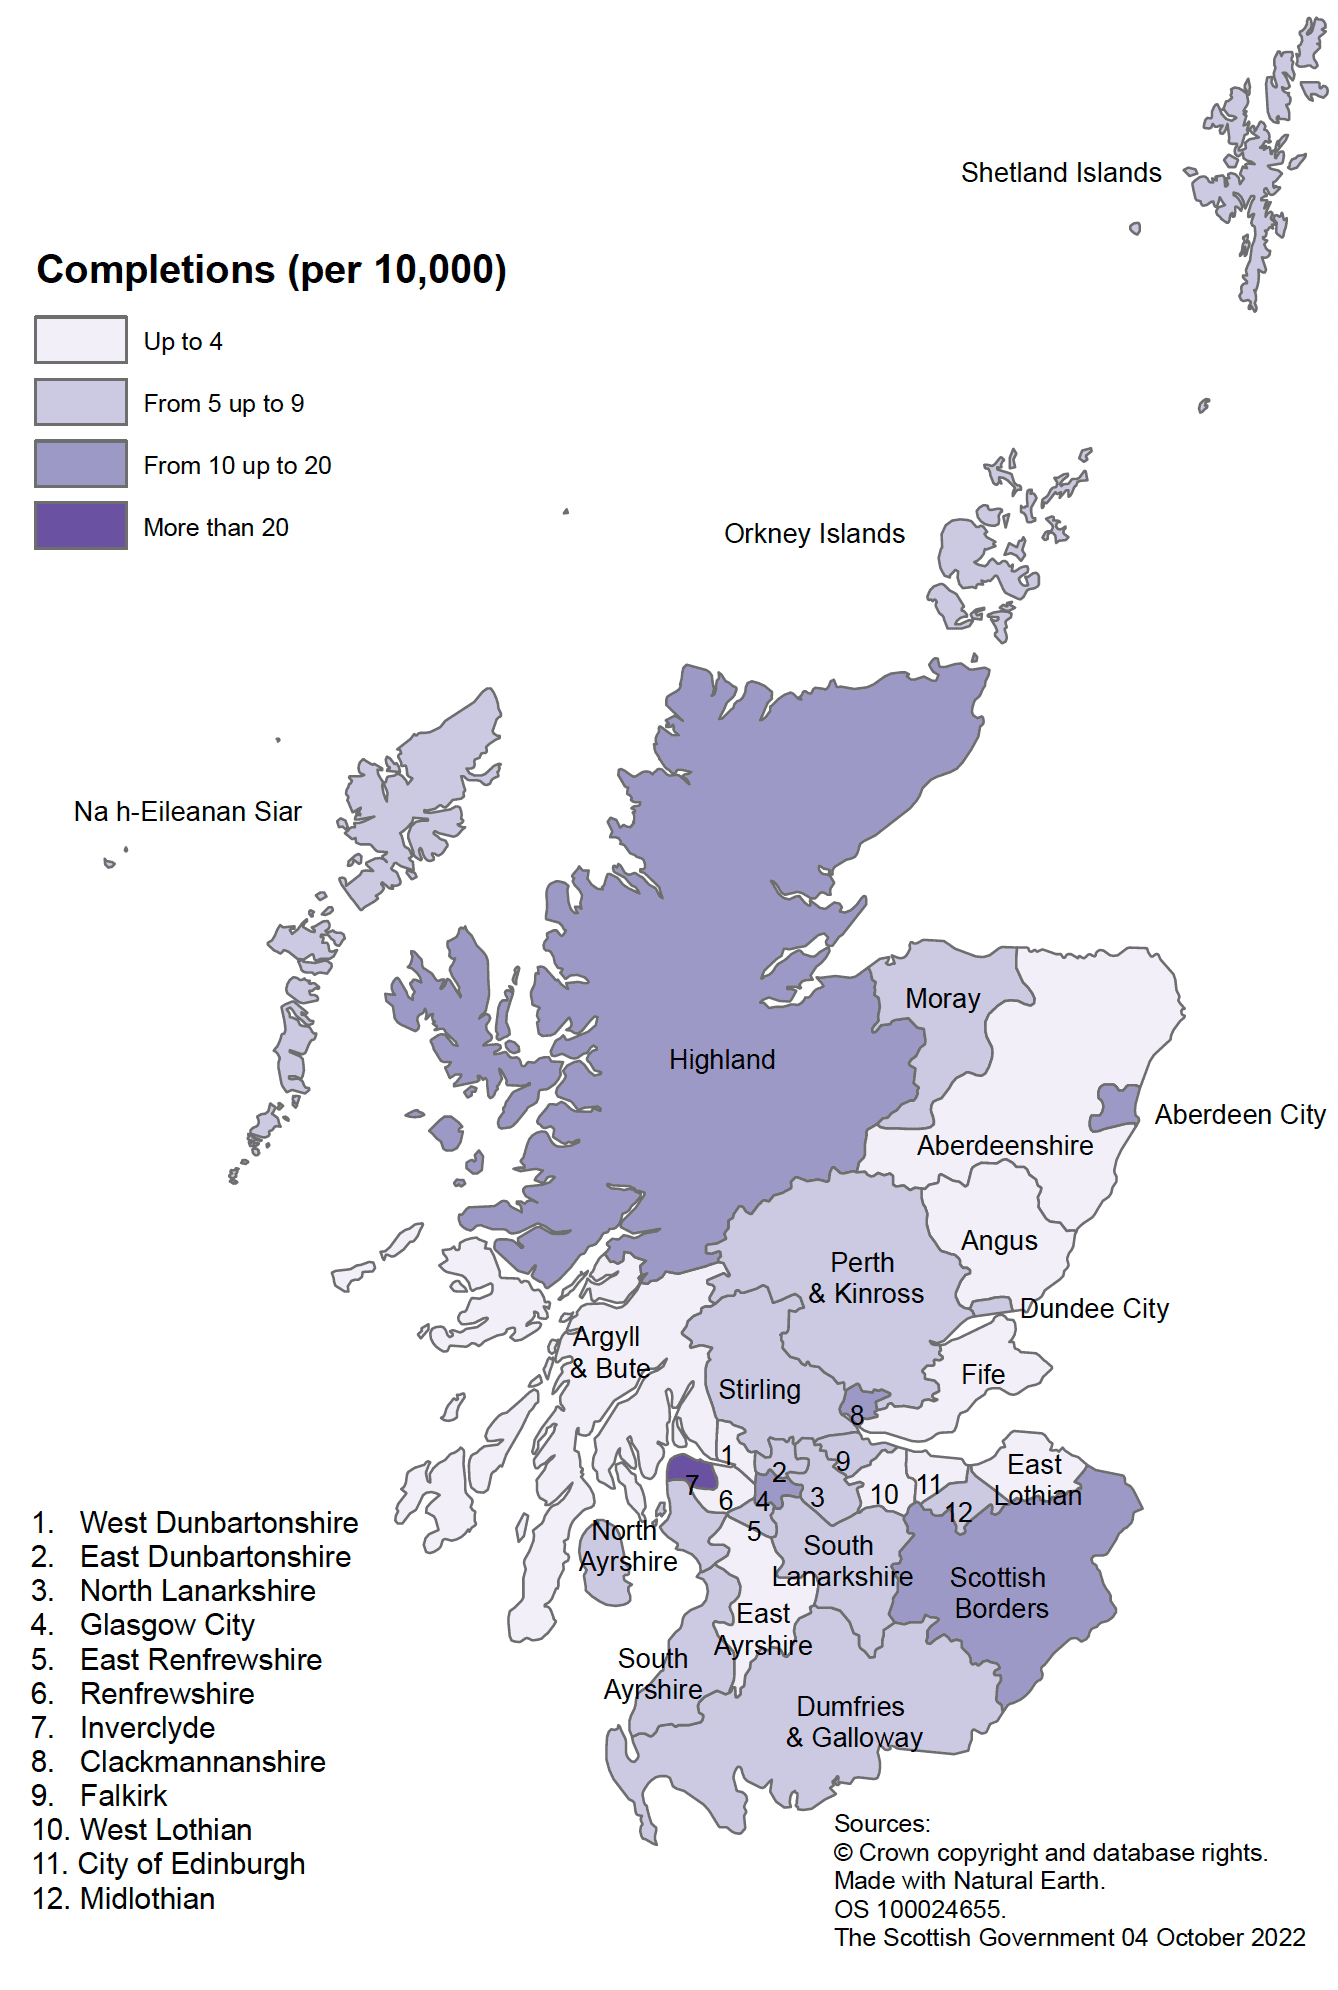 New build housing – A map of local authority areas in Scotland showing housing association completion rates per 10,000 population for year to end March 2022. The highest rates were observed in Inverclyde and Scottish Borders. There were no completions in West Dunbartonshire, and East Ayrshire, Argyll & Bute, Edinburgh City, Fife, East Lothian, Angus, and Aberdeenshire.